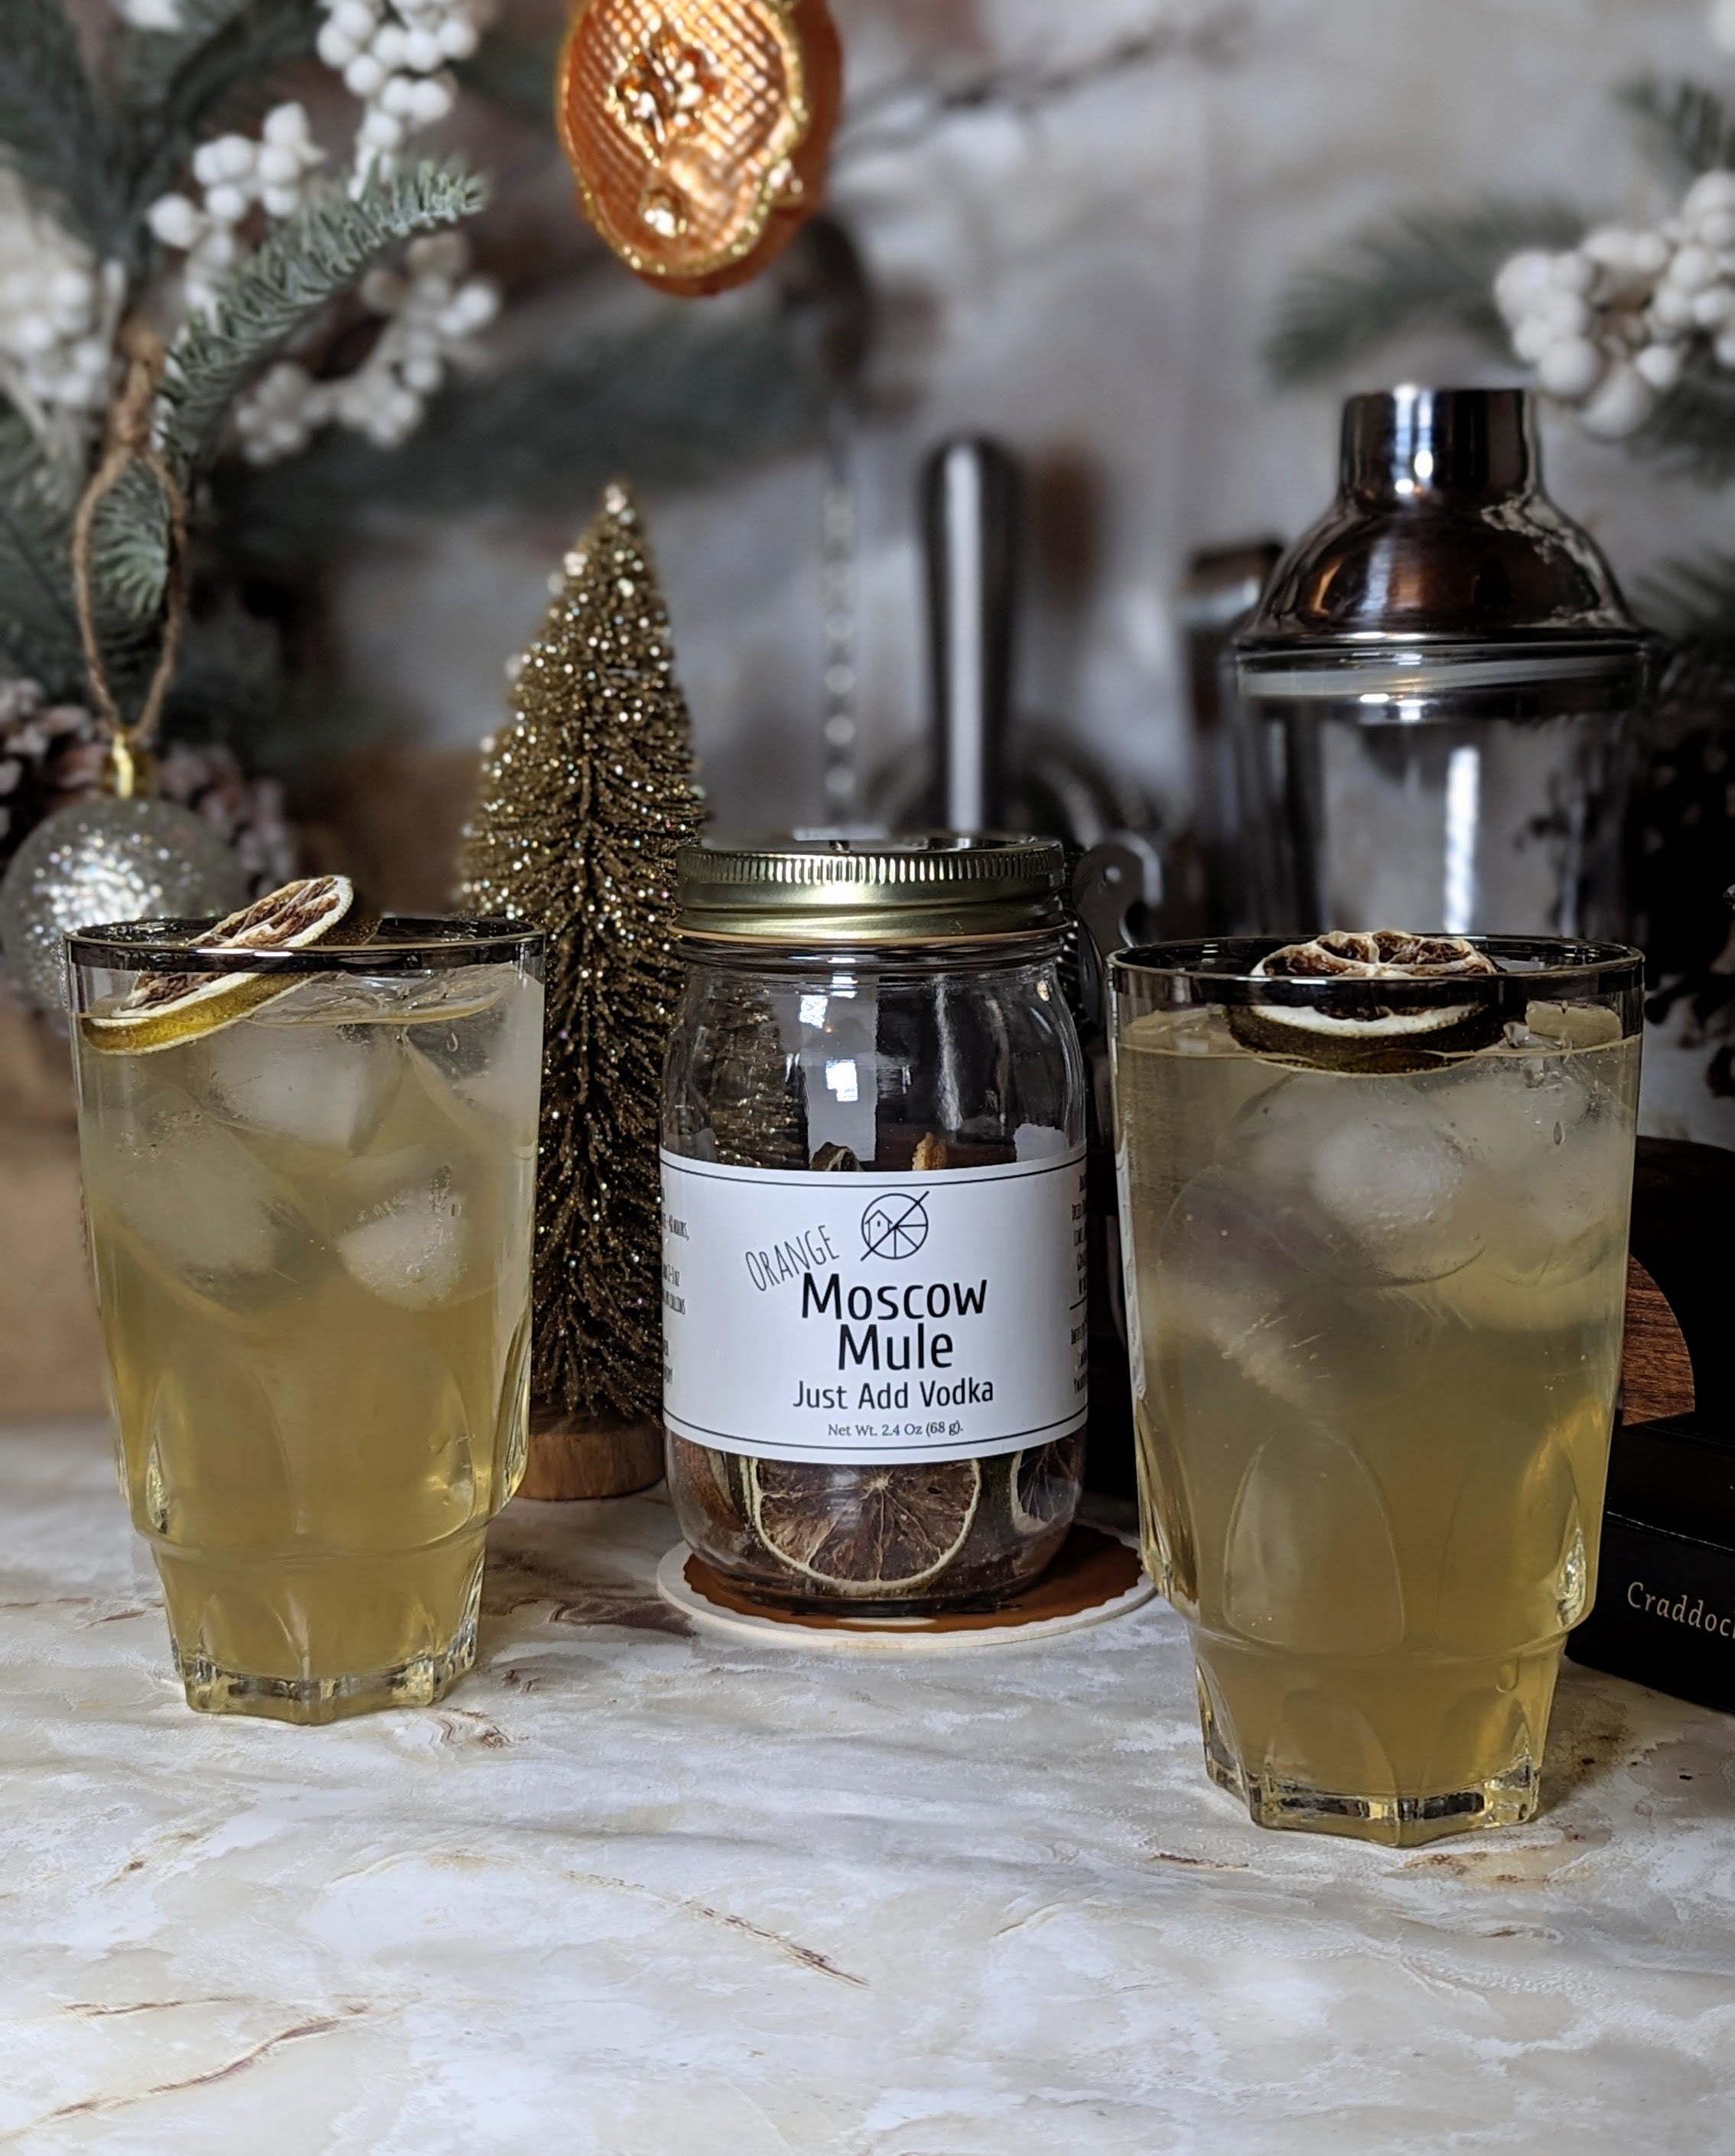 Hot Toddy Cocktail Infusion Kit